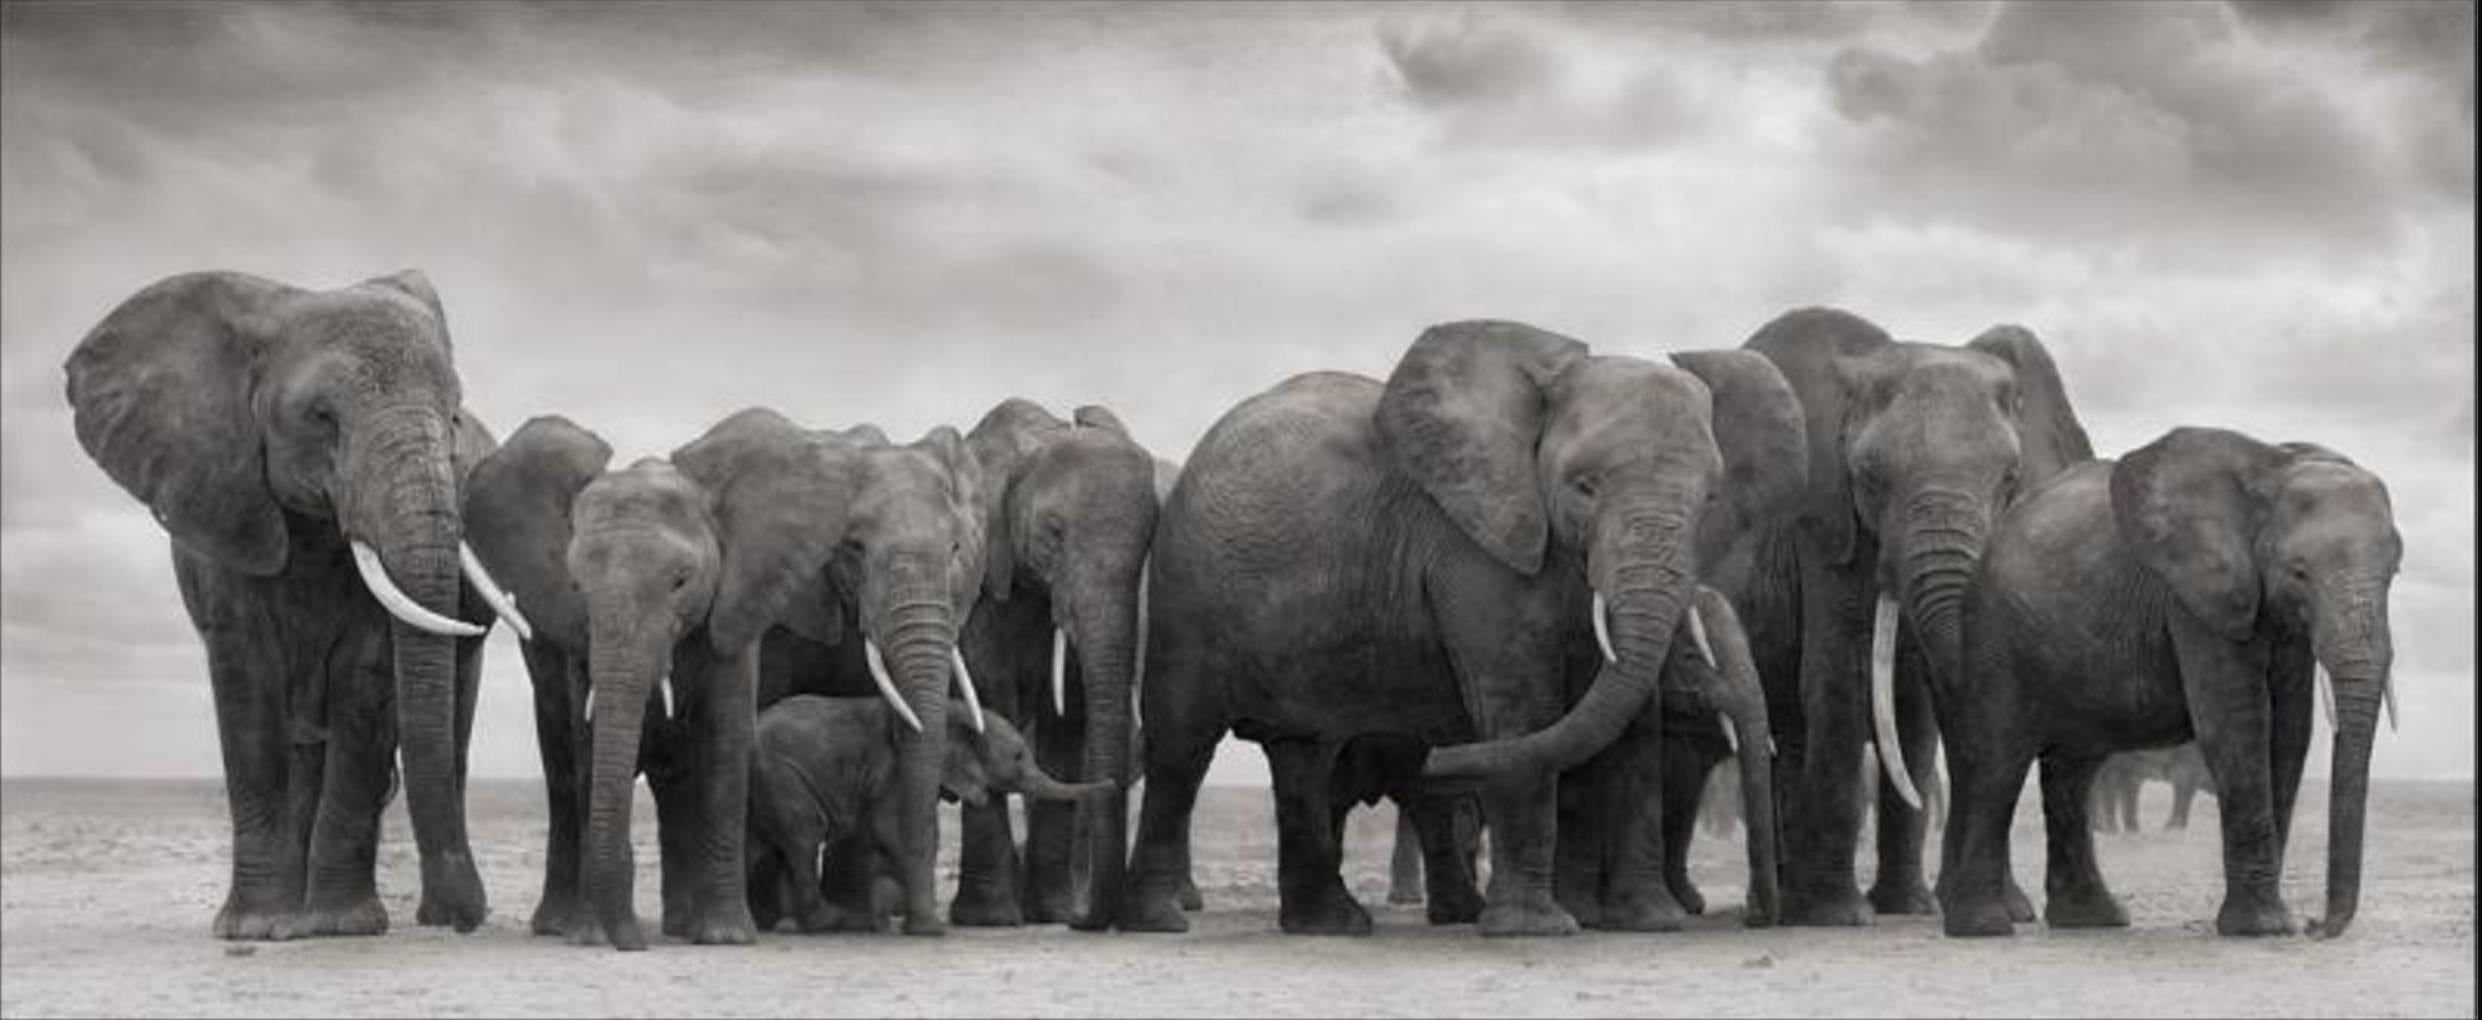 Nick Brandt Black and White Photograph - Elephant Group on bare earth, Amboseli, 2008